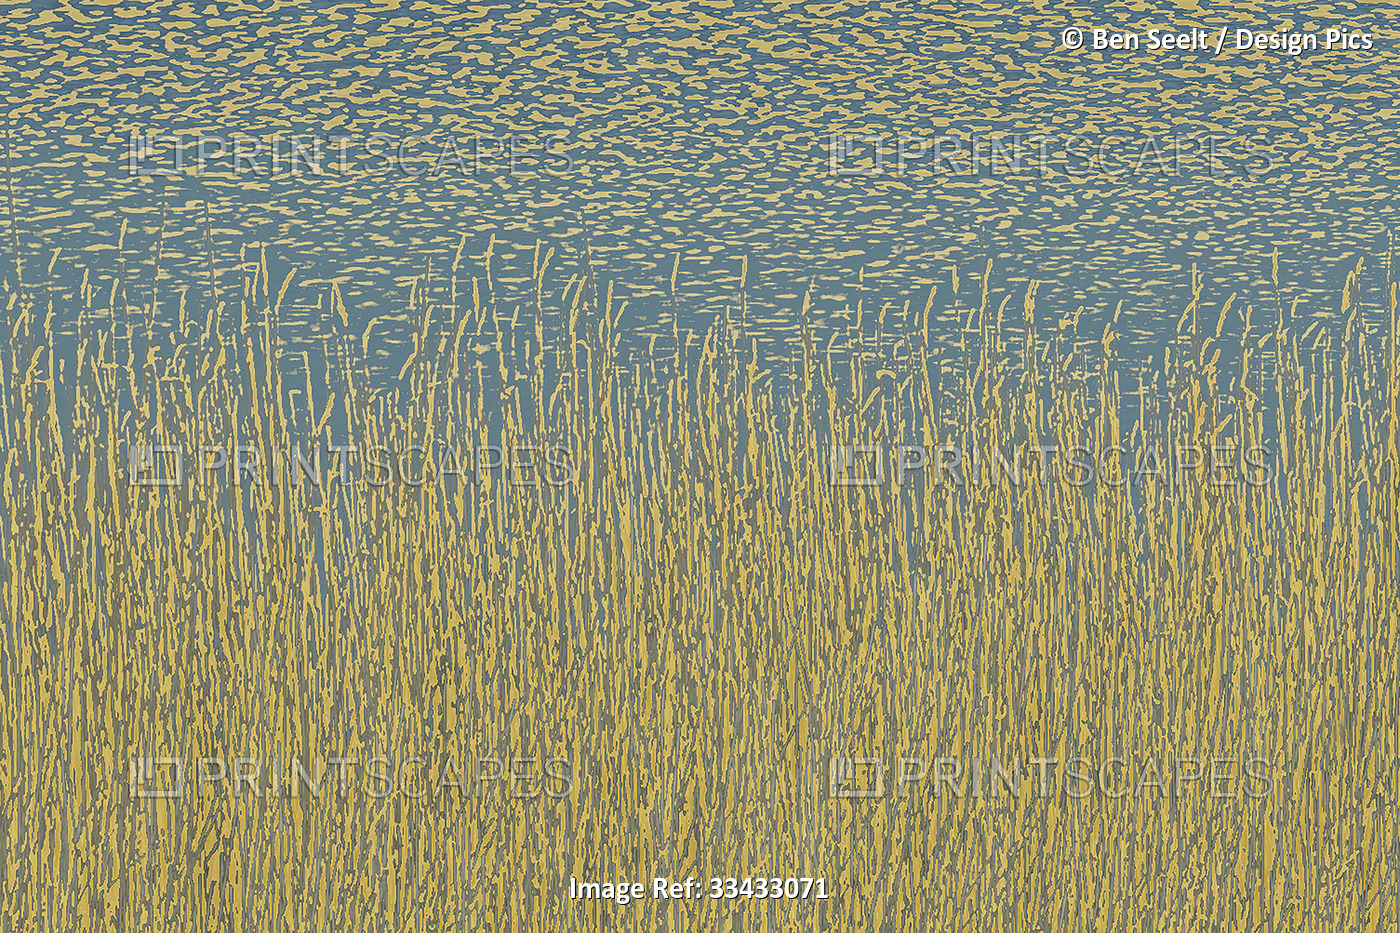 Impressionist art of water and reeds, Van Gogh style; Artwork